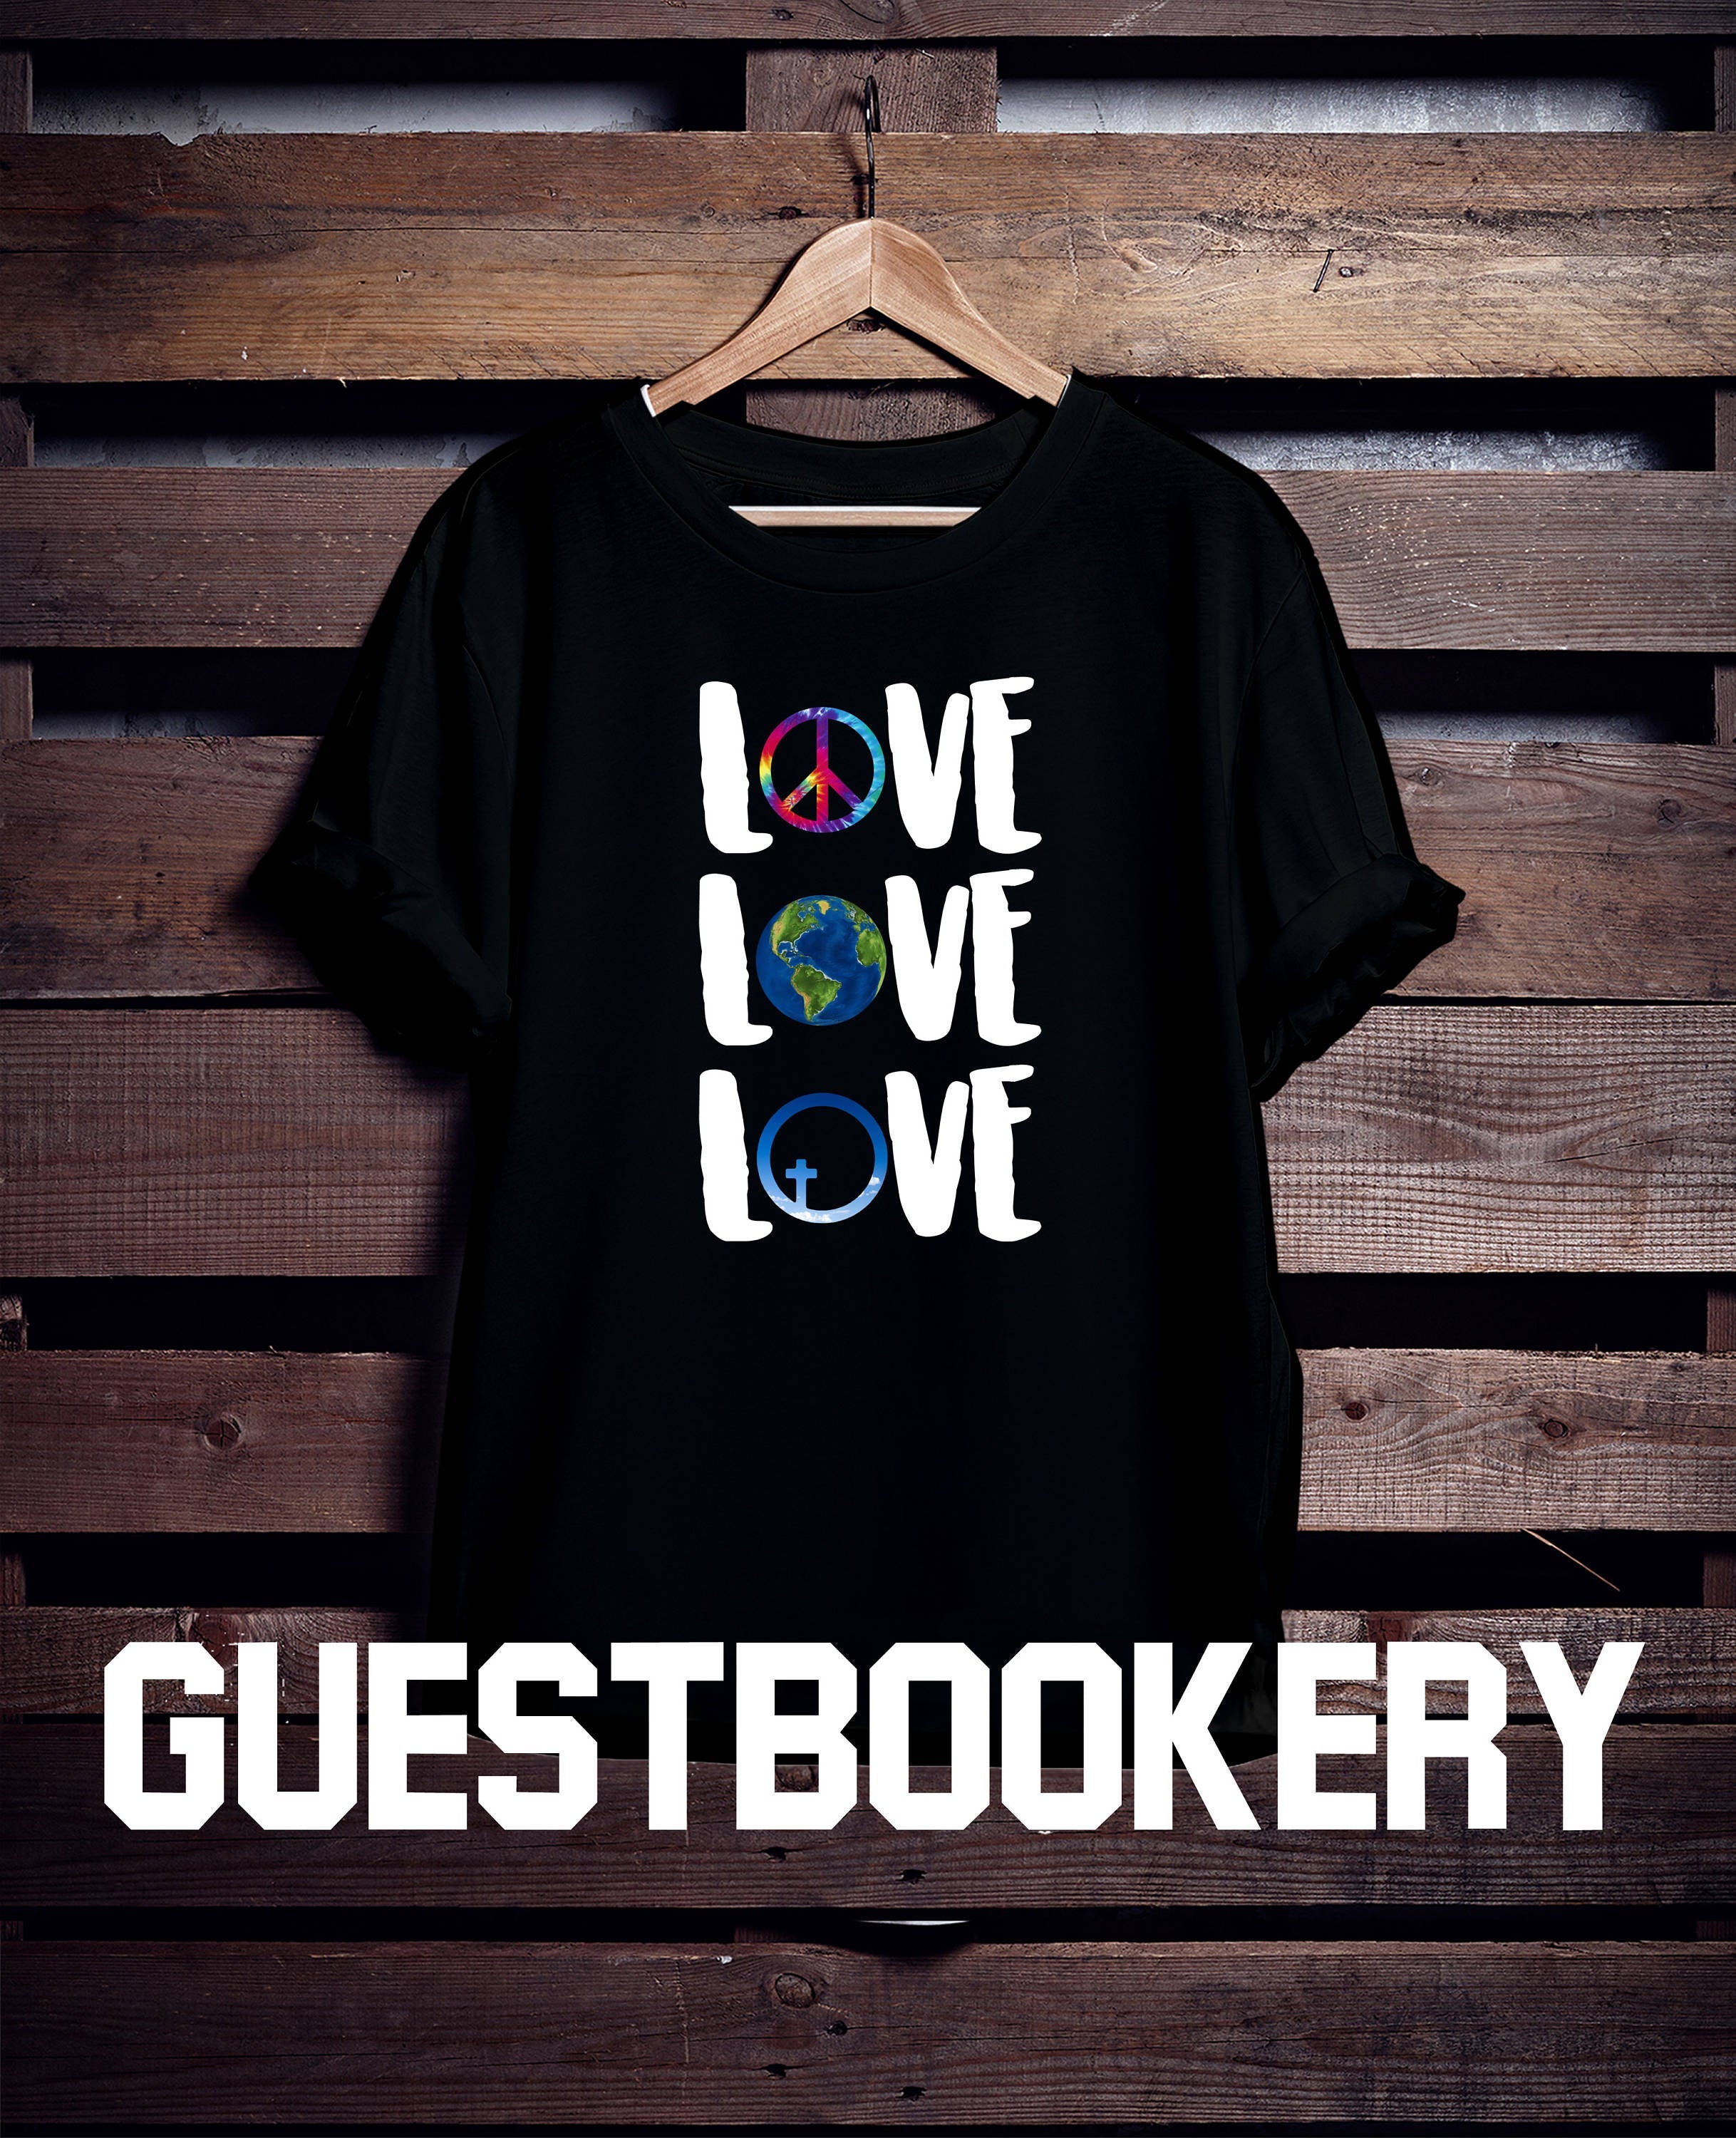 Love T-shirt - Guestbookery